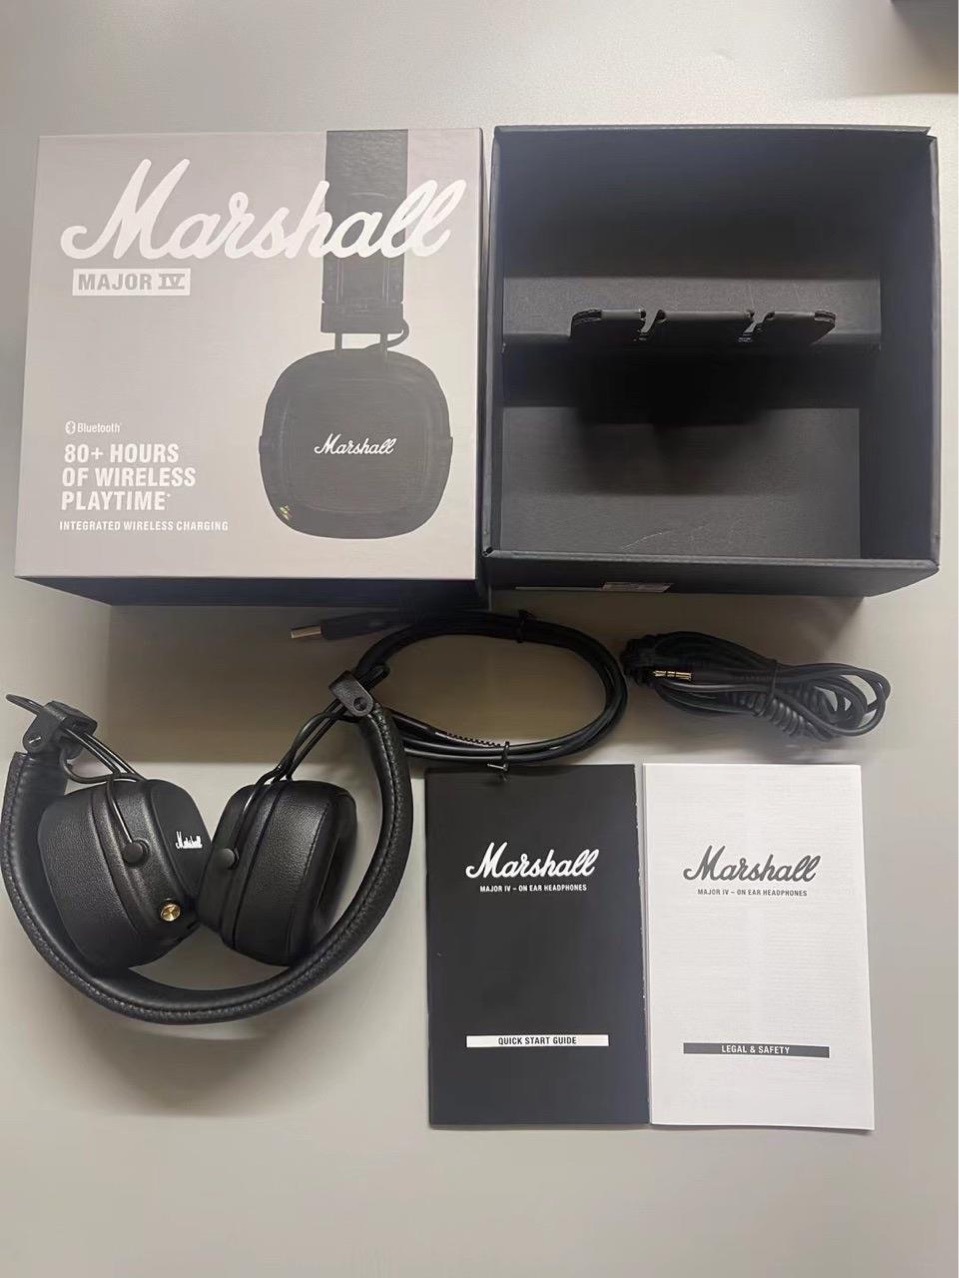 Applicable to Marshall Marshall Major Iv4 Generation Headset Wireless Bluetooth Headset Subwoofer